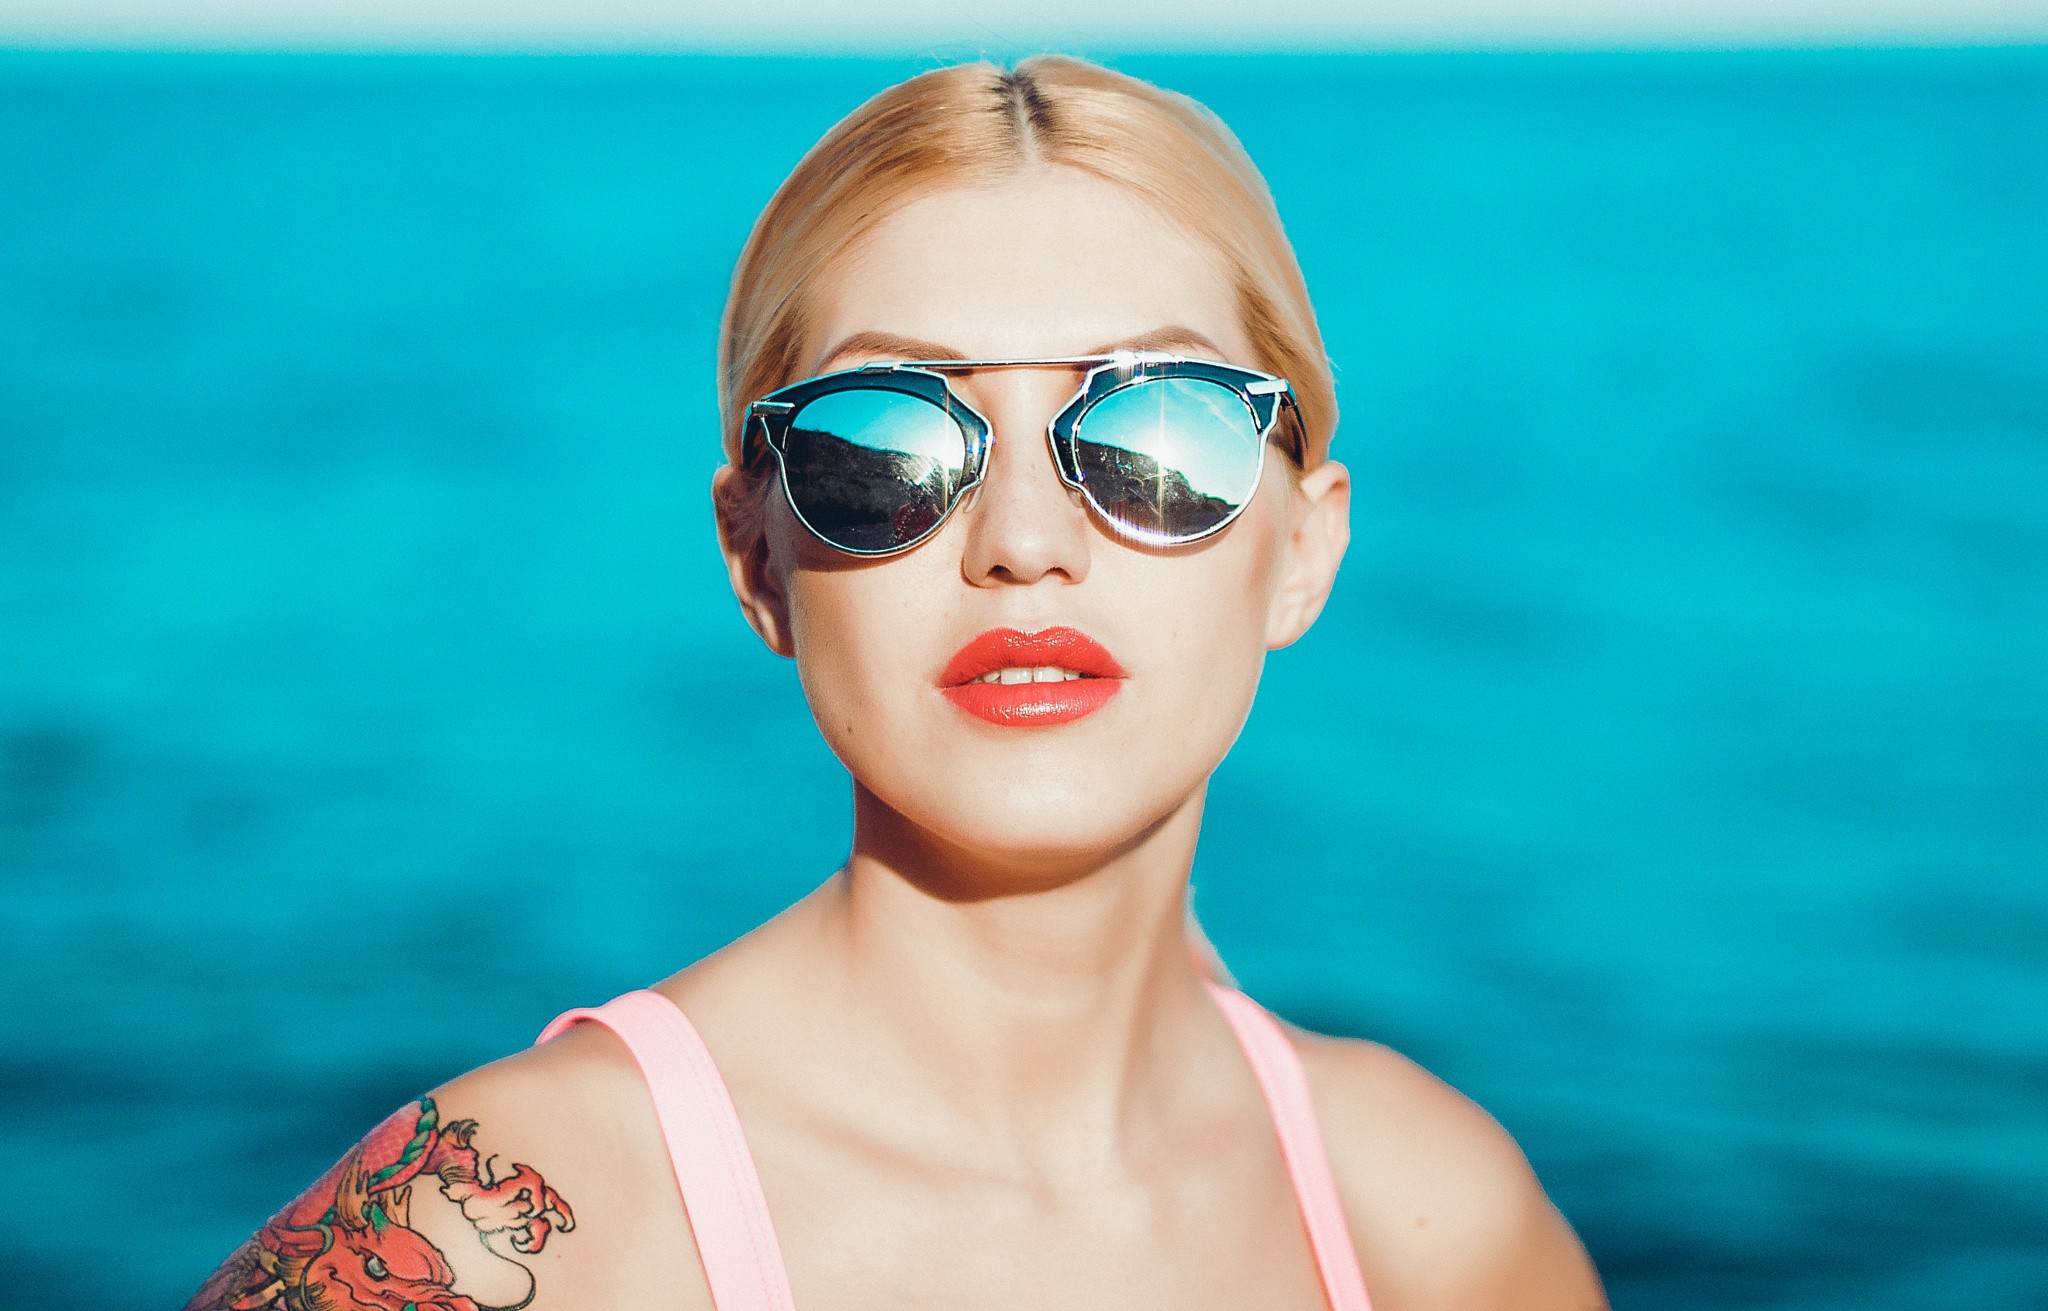 Red Lipstick Sunglasses Blonde Blue White Women With Shades Sea Shades 2048x1311